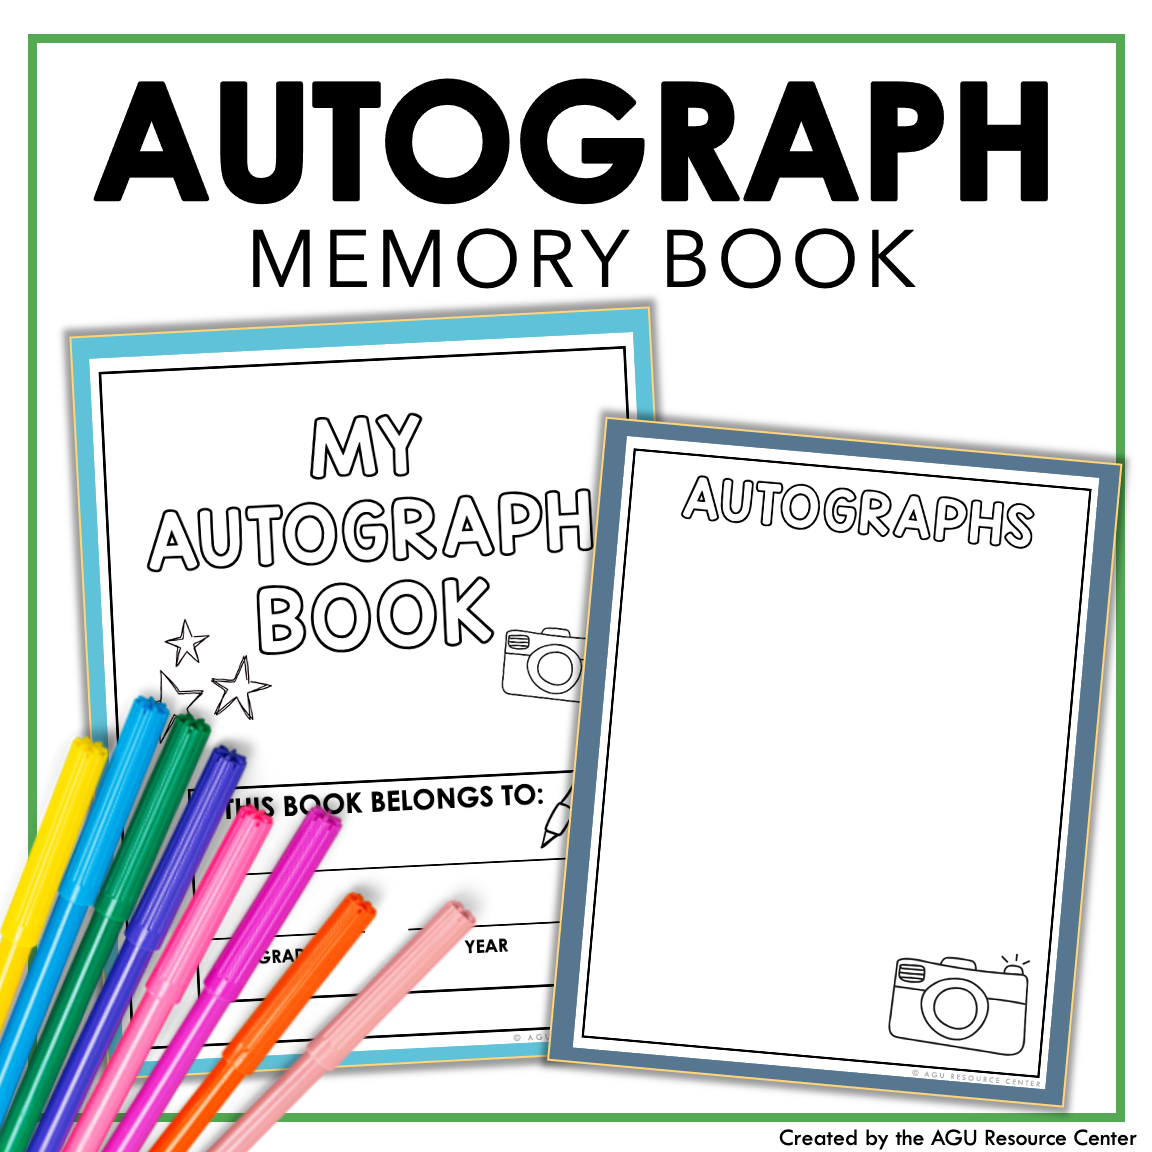 Autograph Book | End of the Year Activities | Special Education